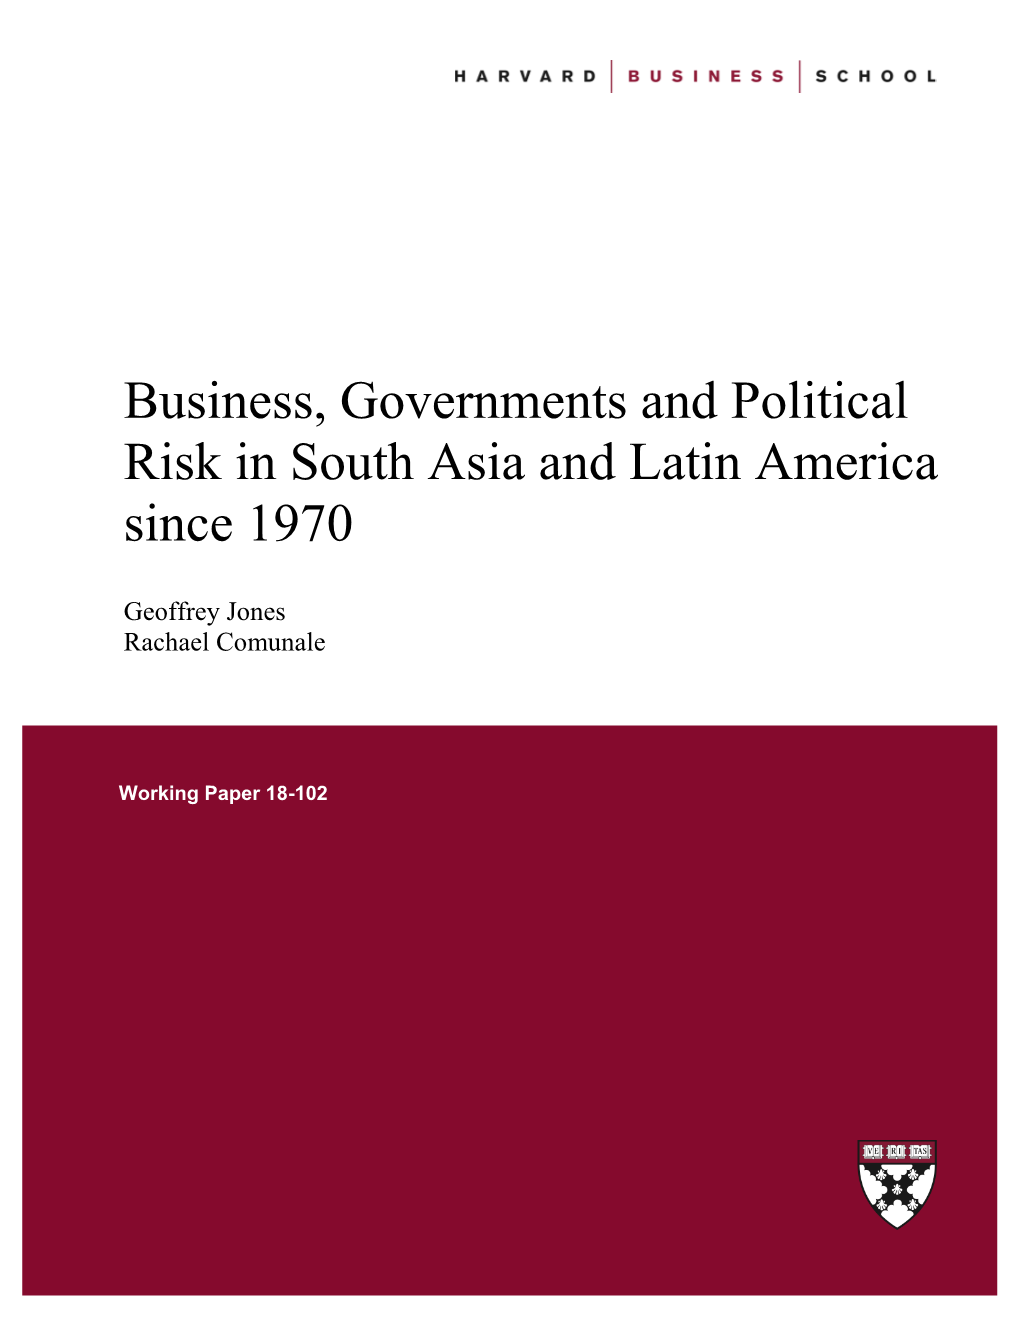 Business, Governments and Political Risk in South Asia and Latin America Since 1970